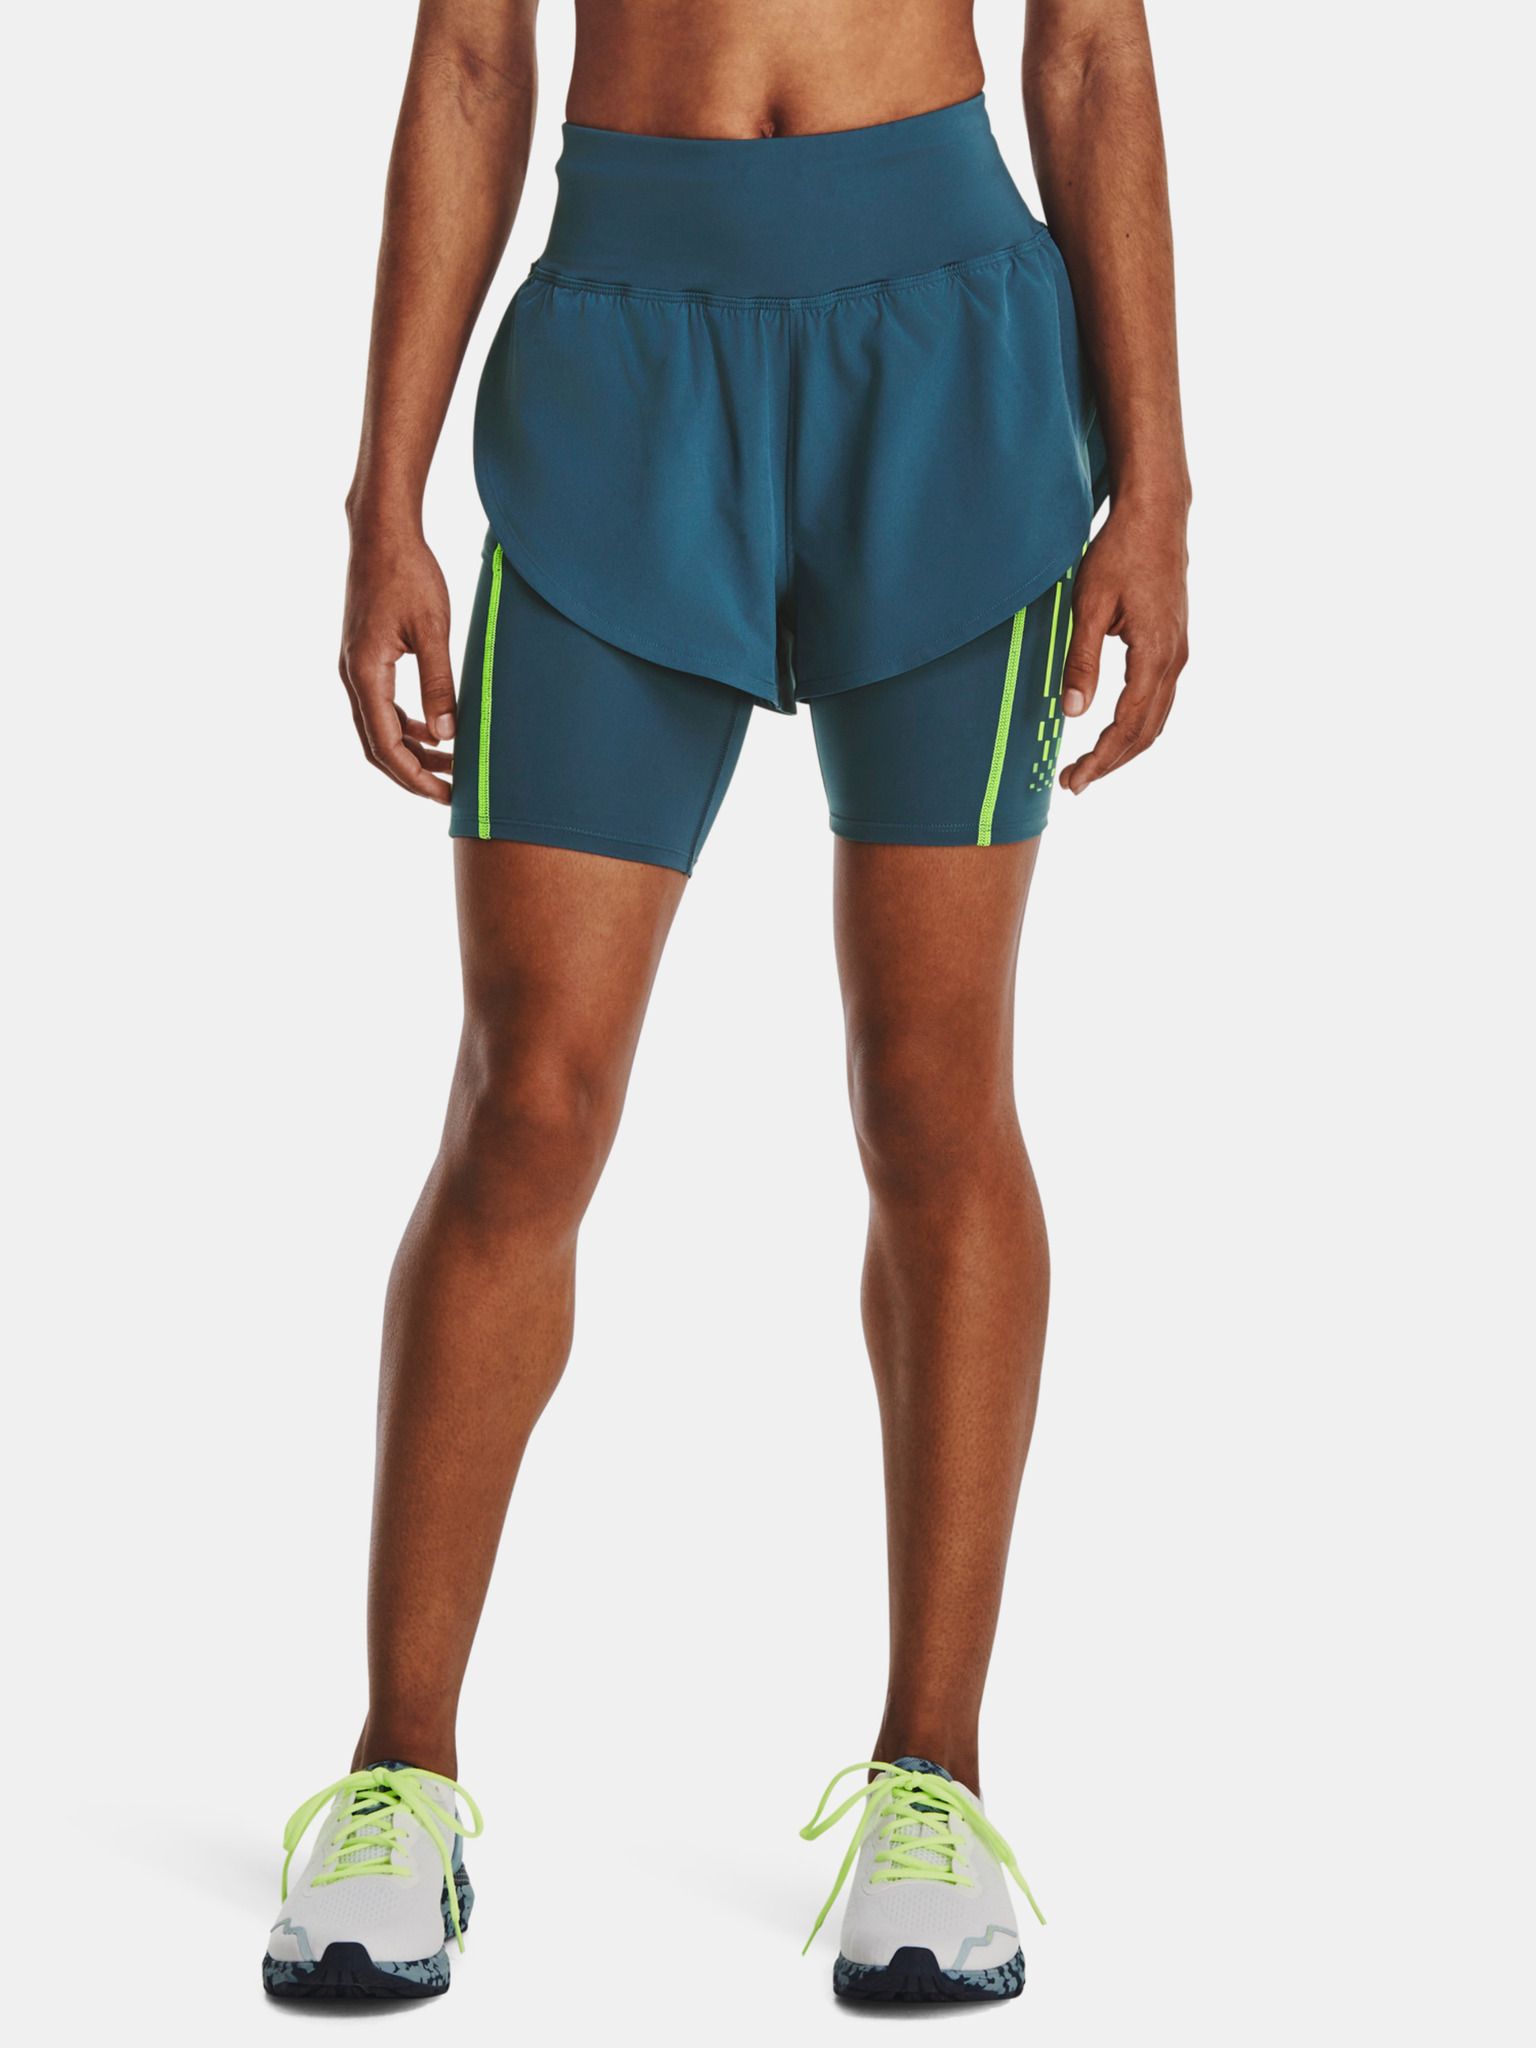 Buy Under Armour Play Up 3.0 Twist Shorts Women Turquoise online